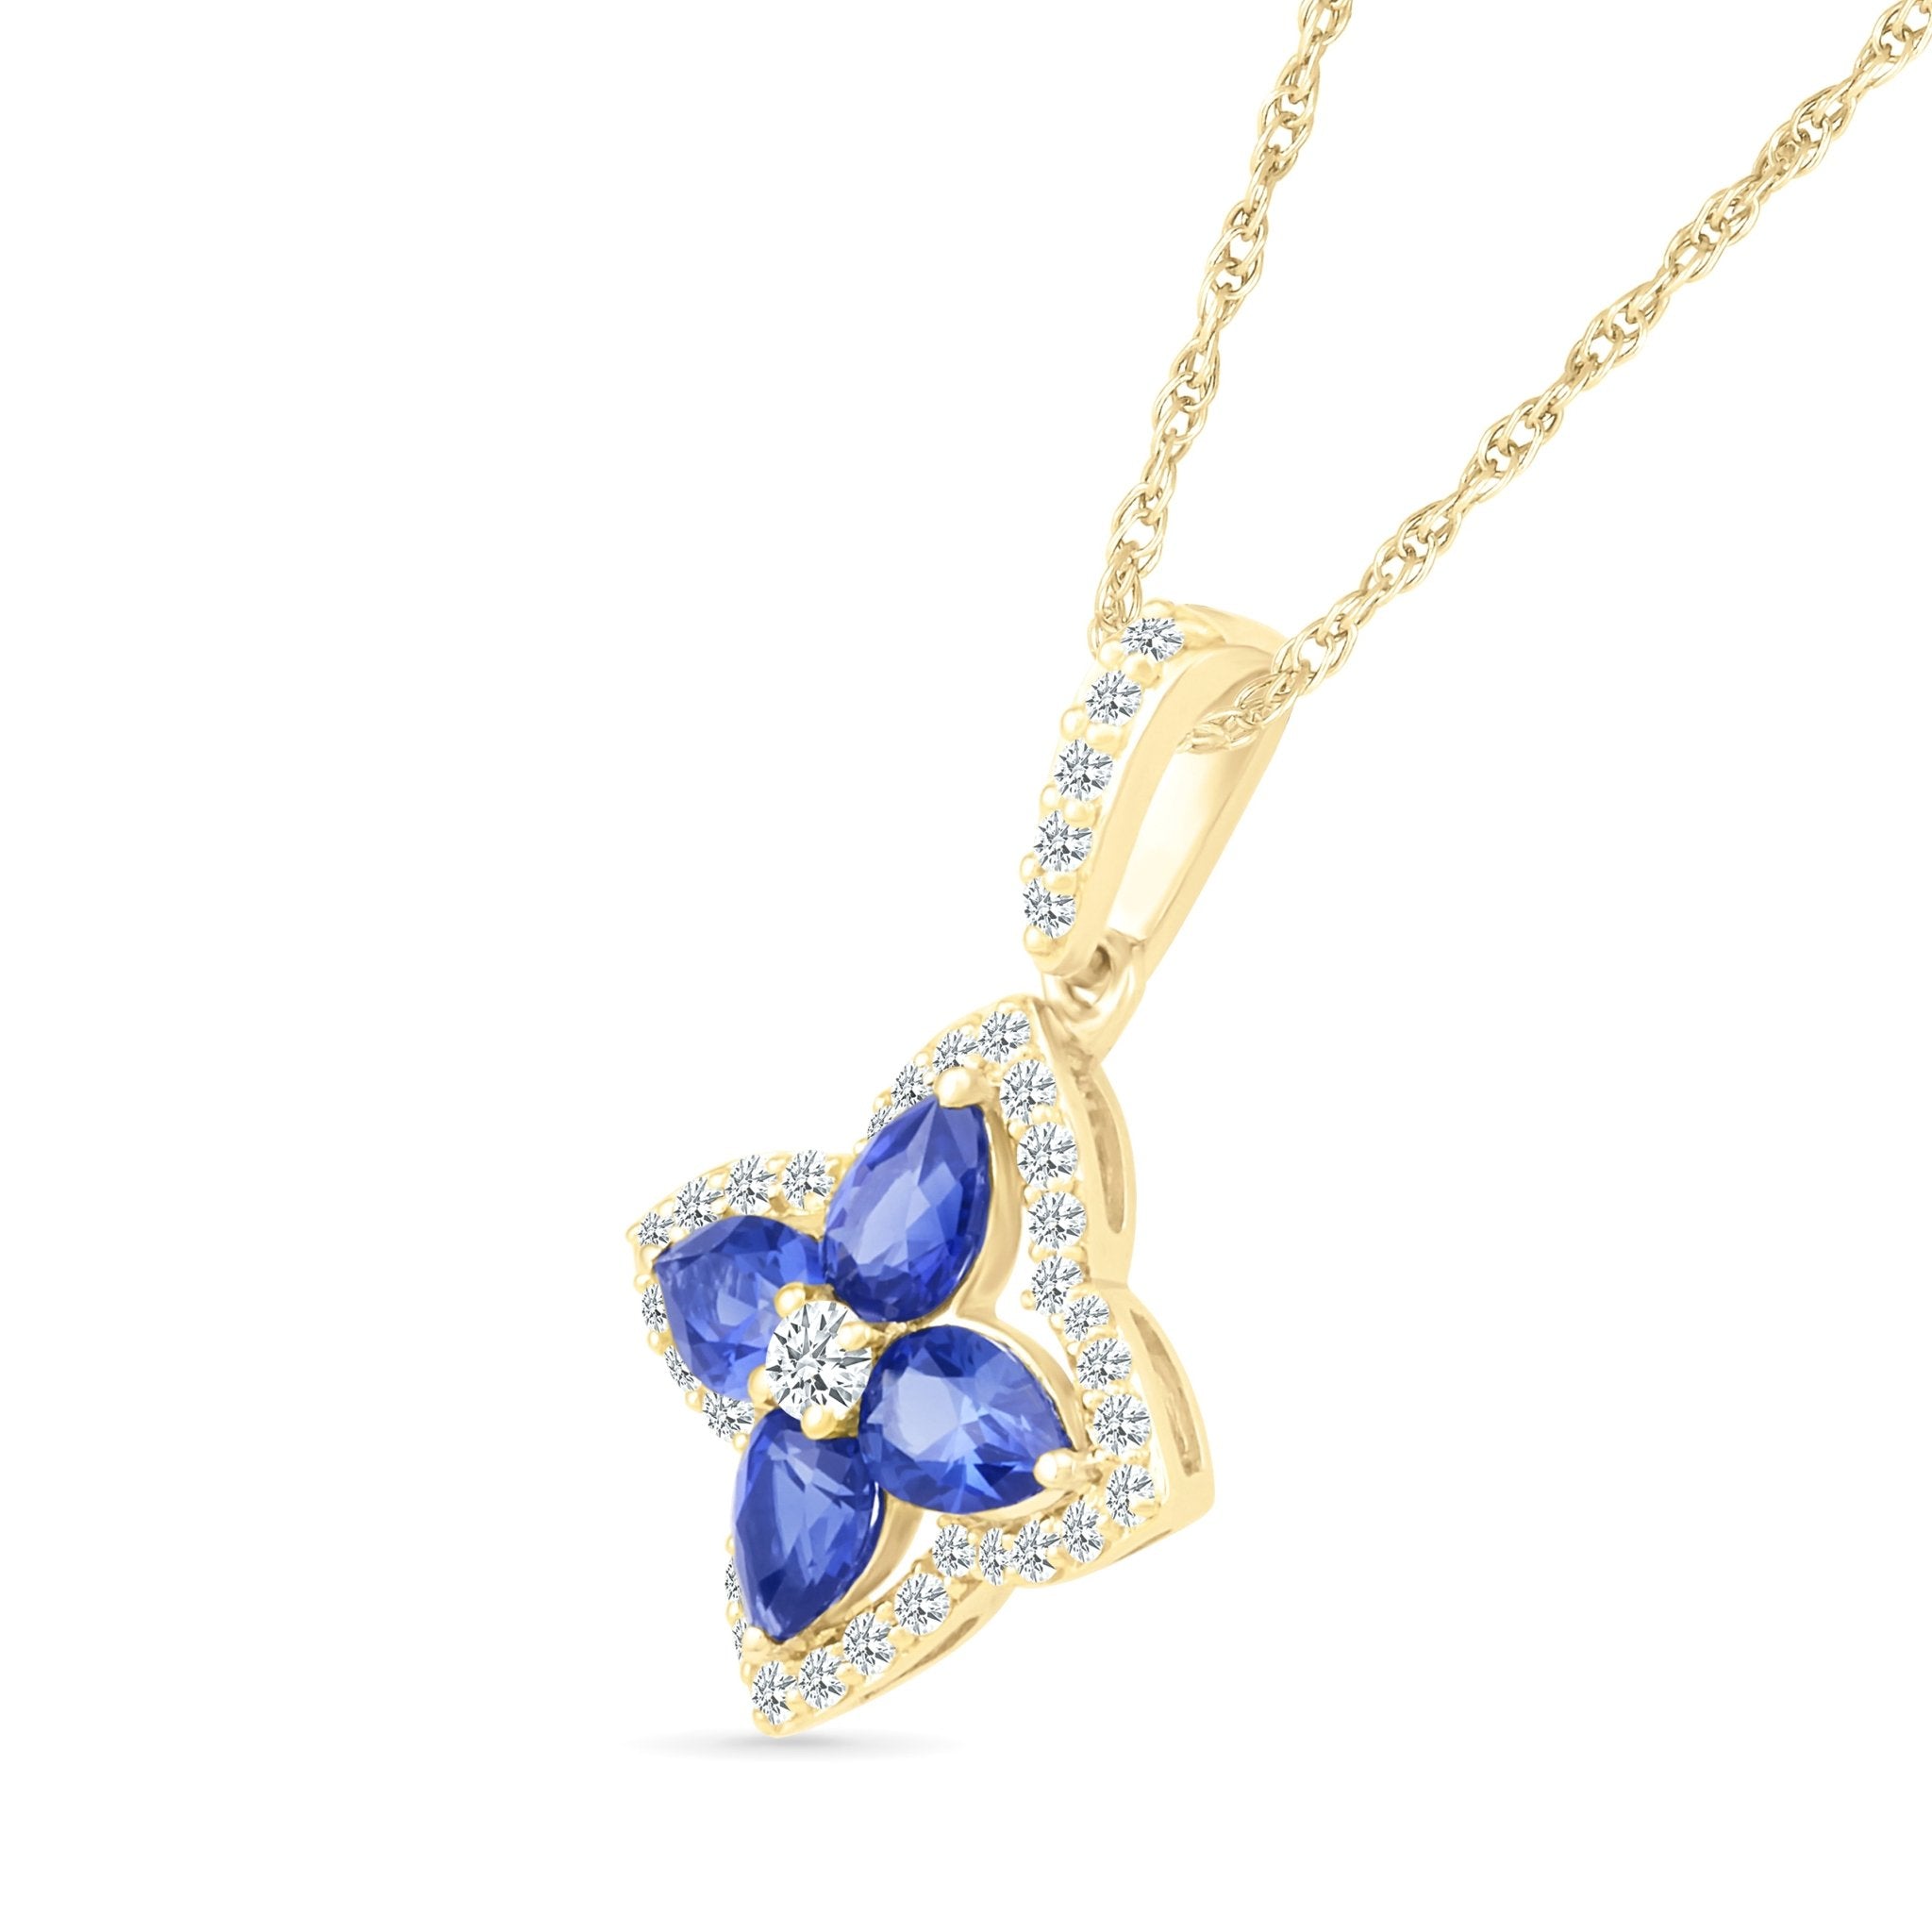 Blue Sapphire Clover Pendant with White Sapphire Halo Necklaces Estella Collection #product_description# 32724 10k Birthstone blue #tag4# #tag5# #tag6# #tag7# #tag8# #tag9# #tag10#